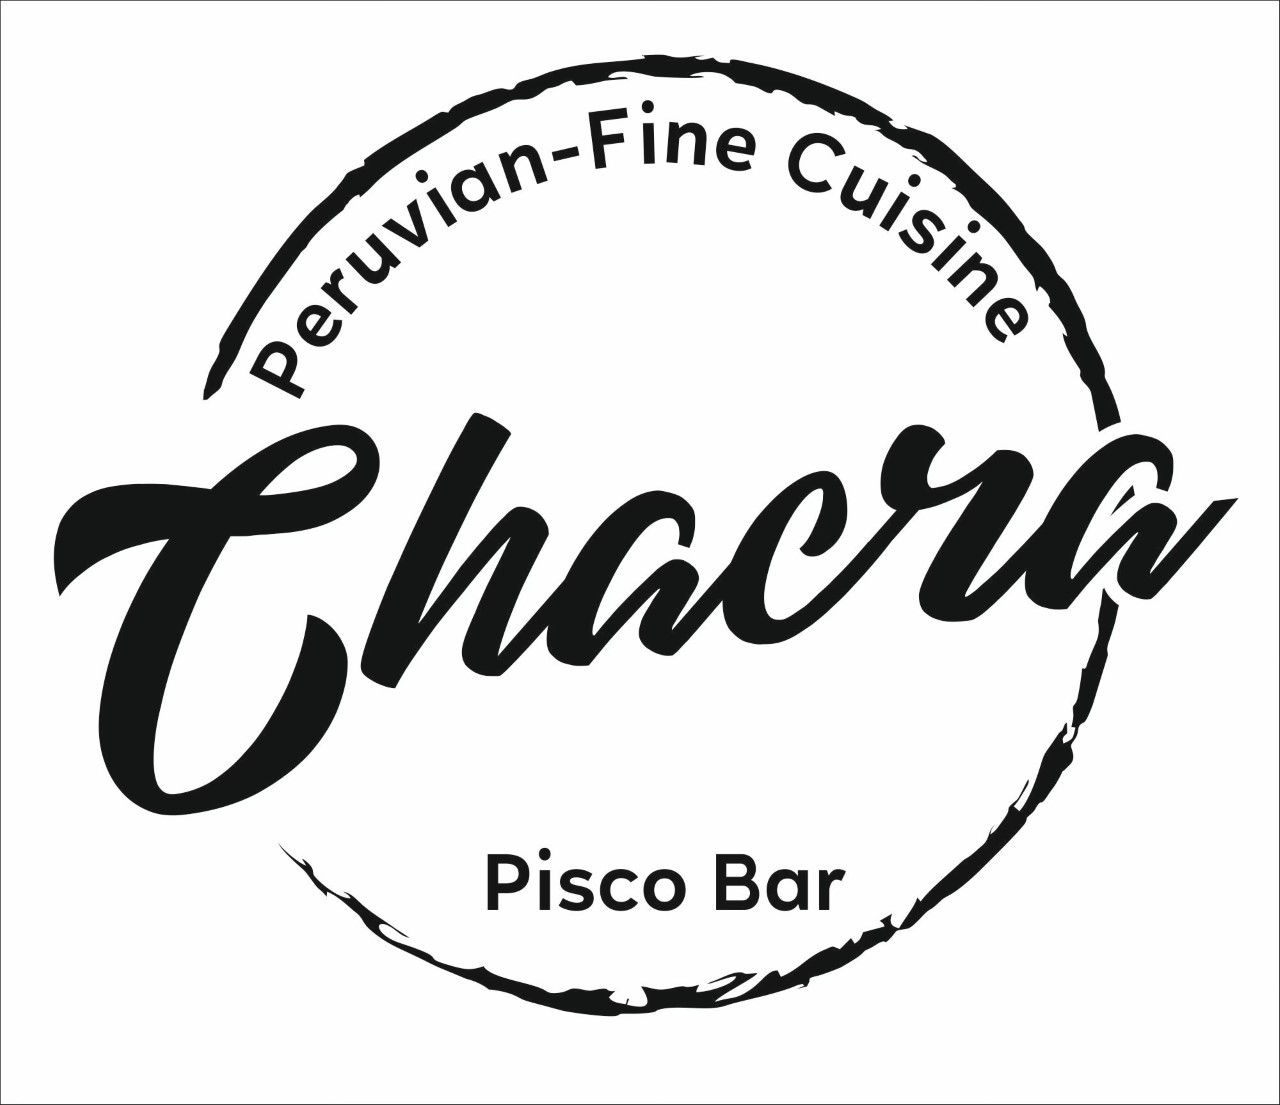 Chacra New Haven 152 Temple Street